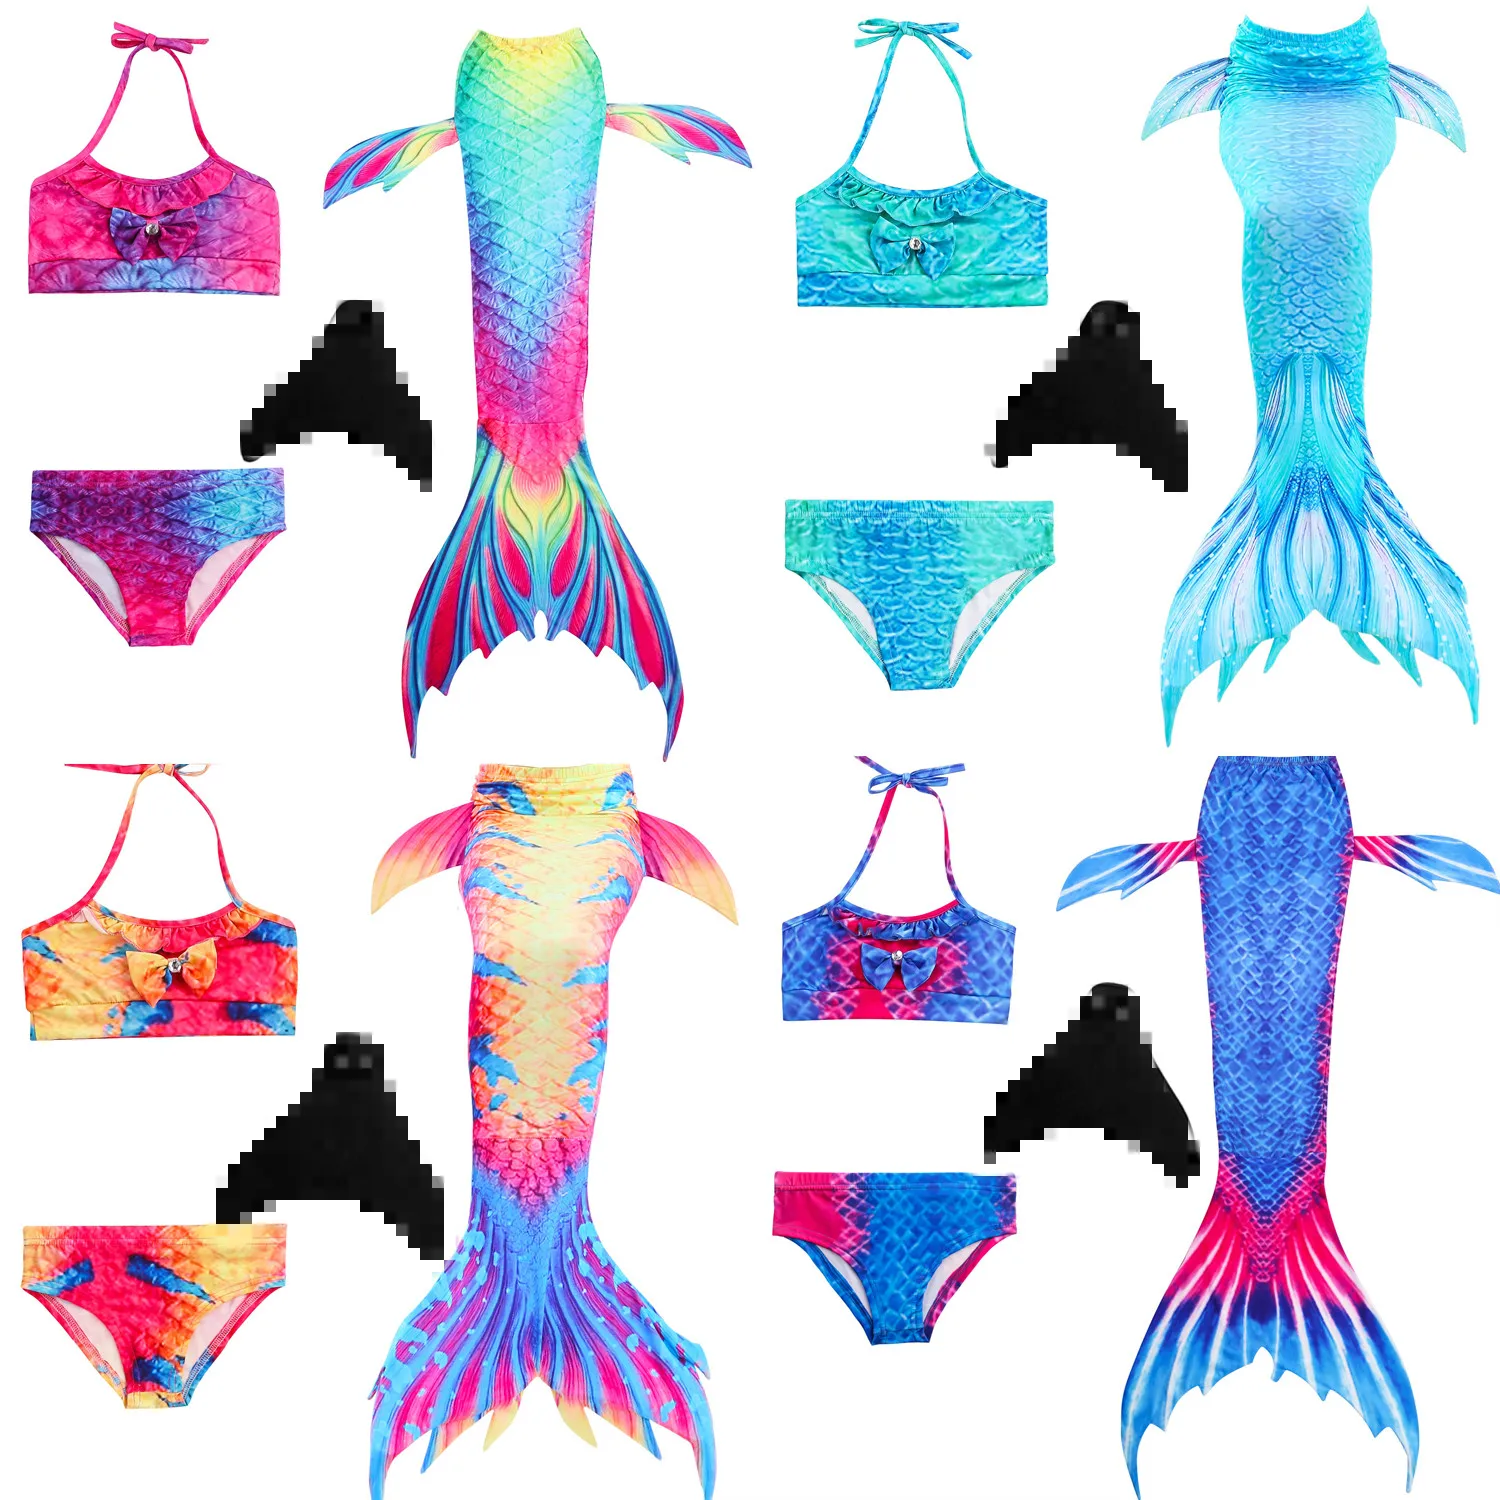 

Ariel Swimmable Mermaid Tail for Swimming Children Swimming Mermaid Tails With Monofin Fin Girls Kids Mermaid Cosplay Costume